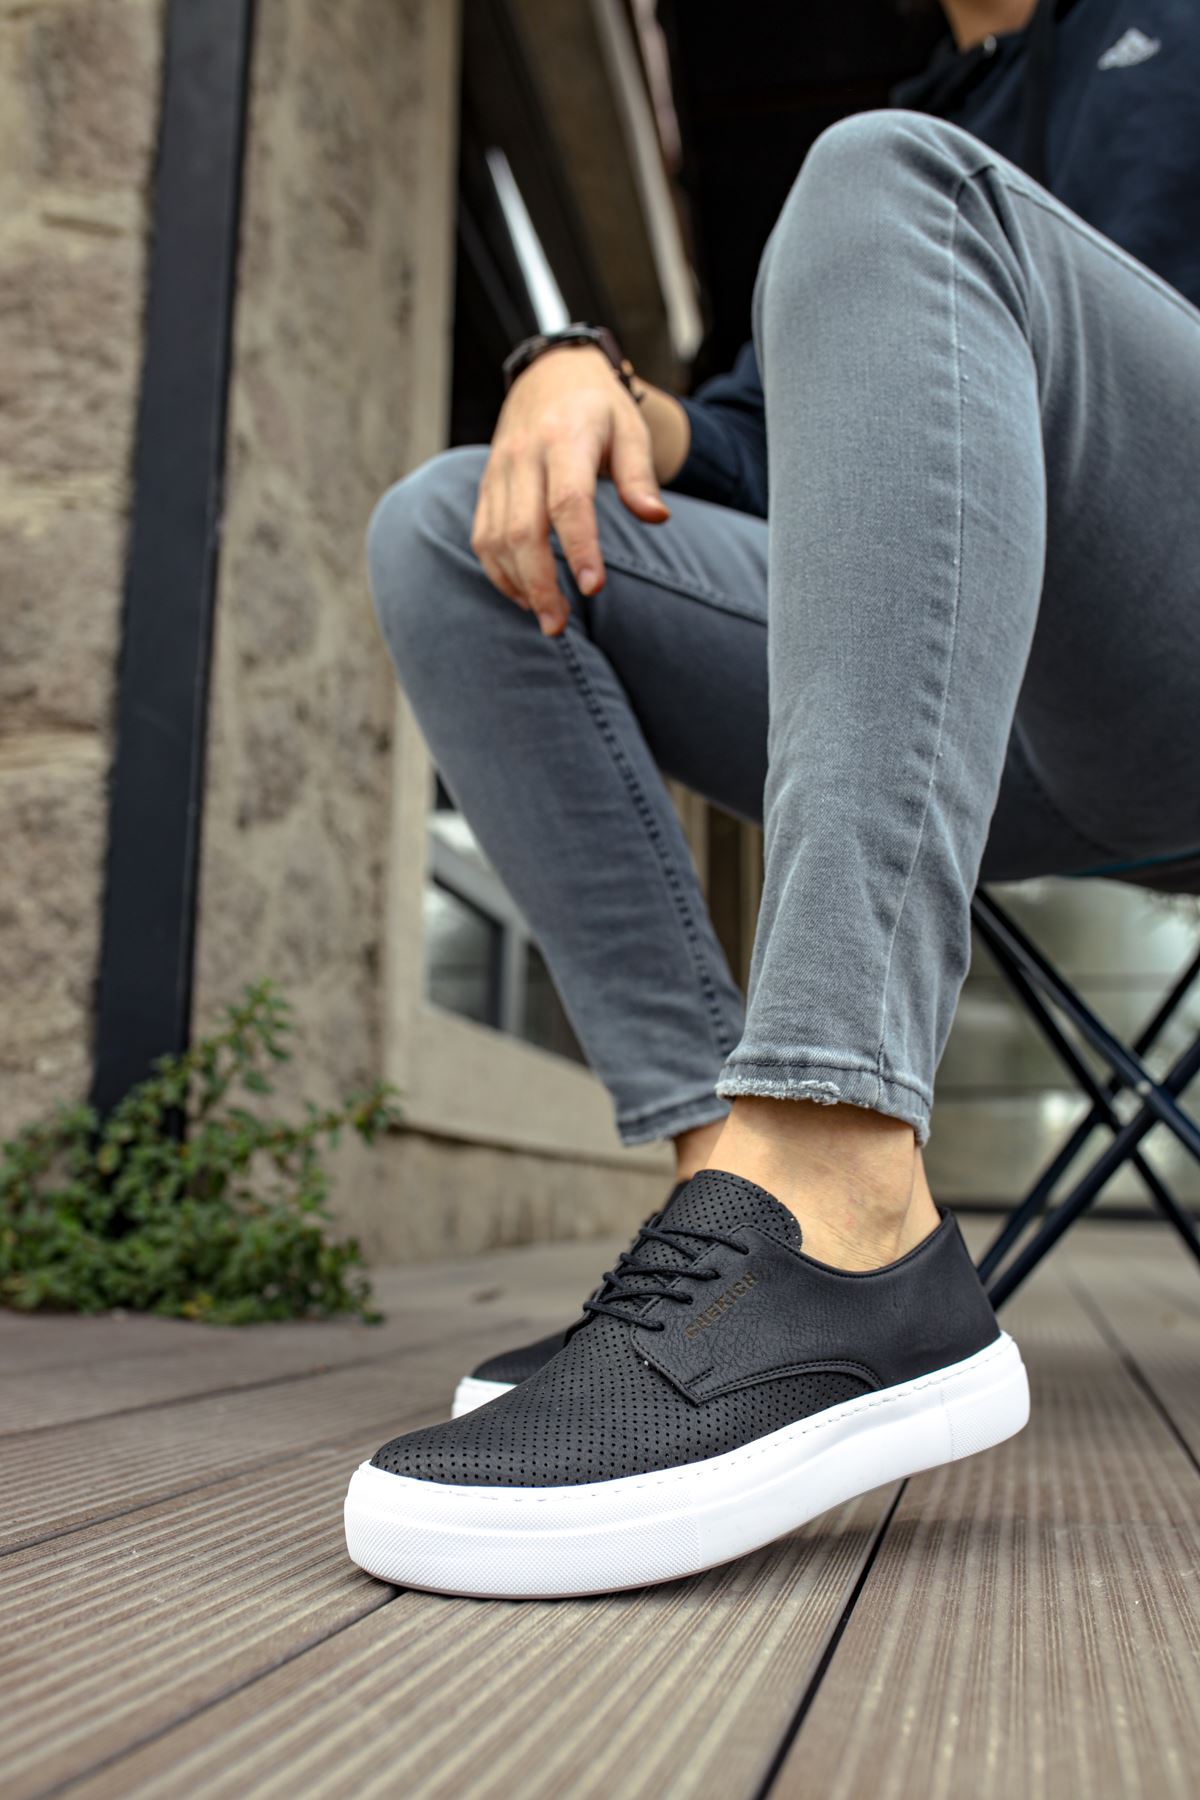 CH061 Men's Orthopedics Black-White Sole Lace-up Casual Sneaker Shoes - STREETMODE ™